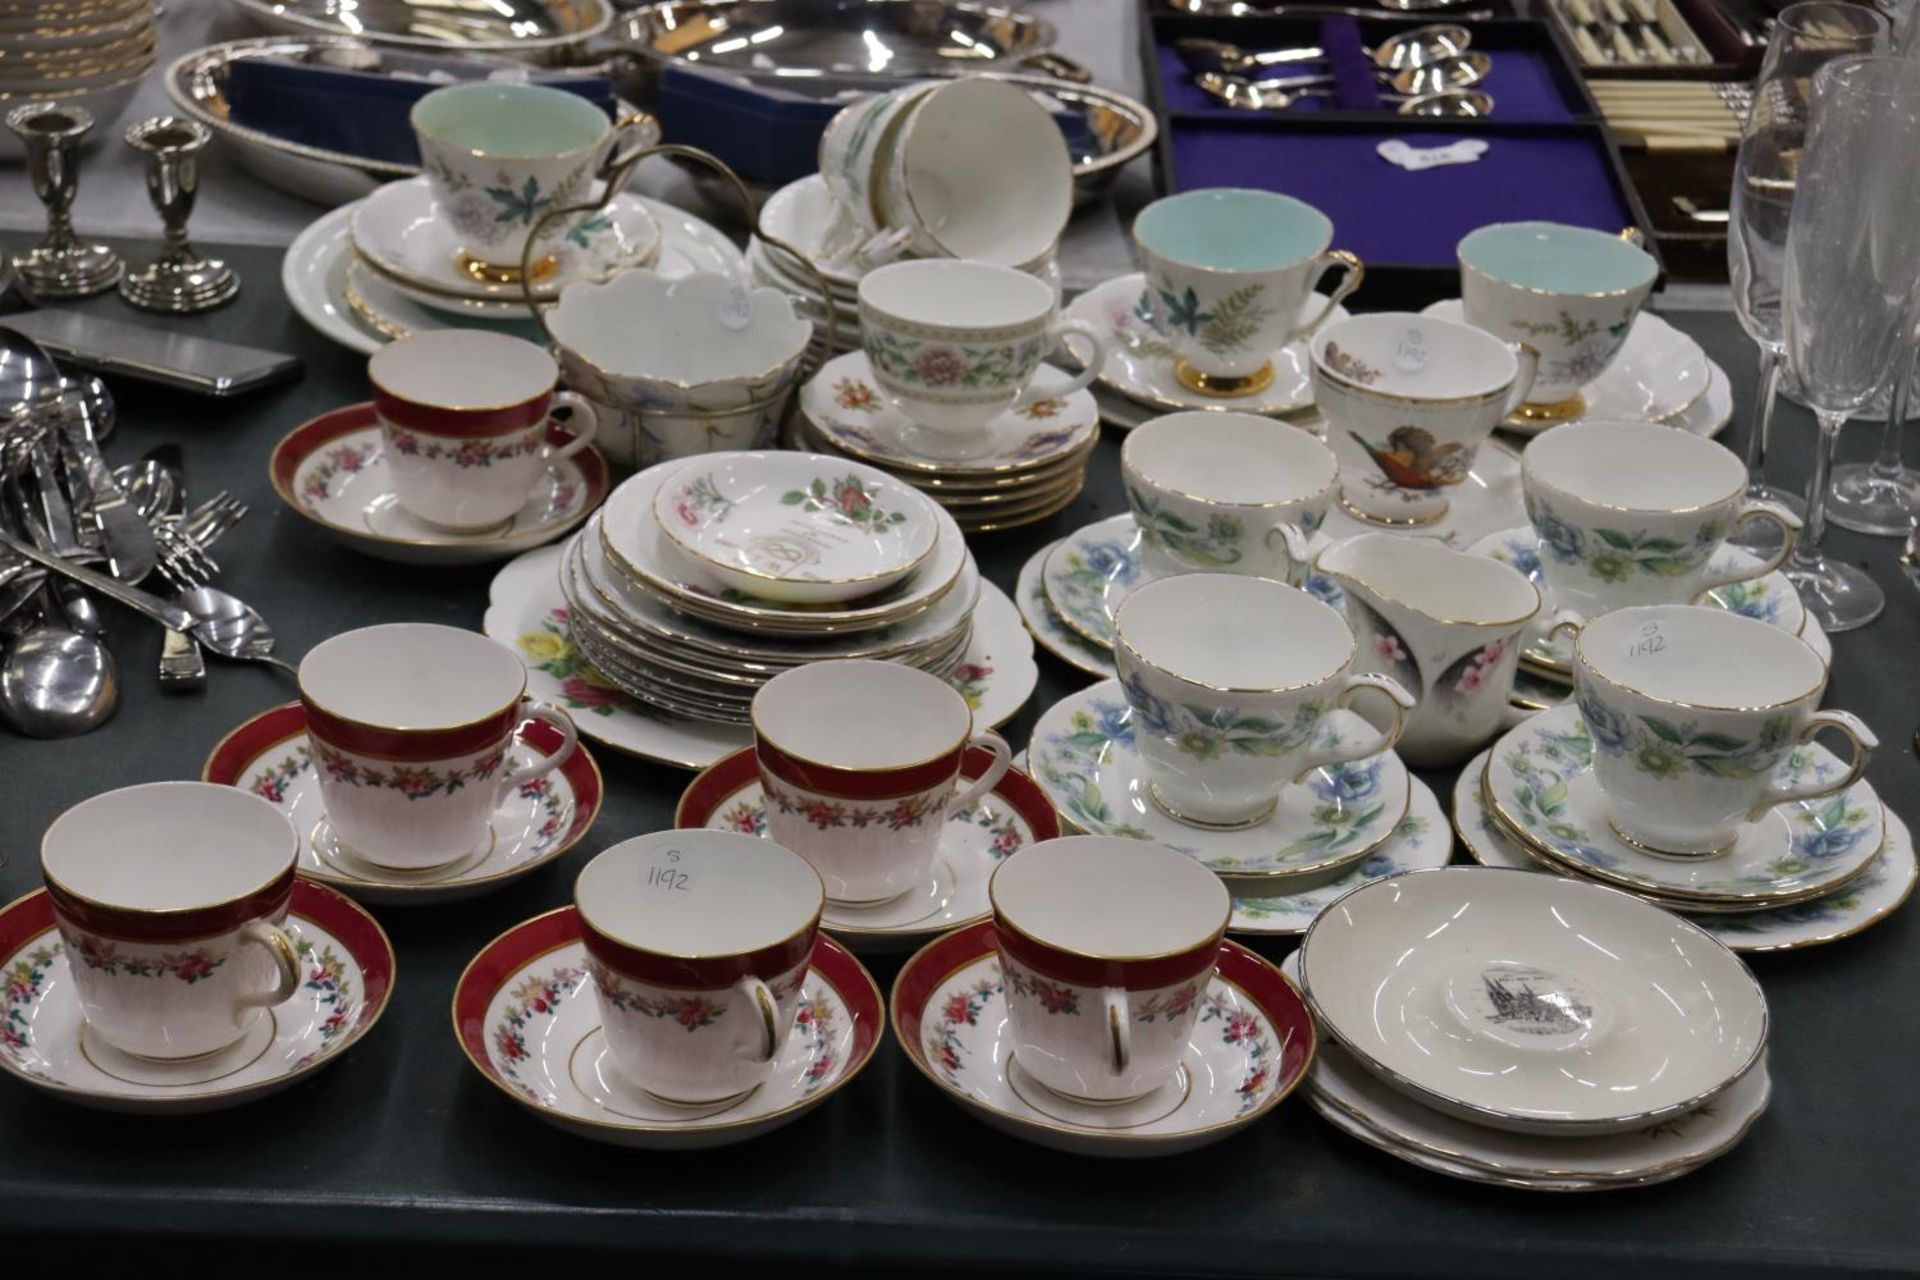 A QUANTITY OF TEACUPS AND SAUCERS TO INCLUDE QUEEN ANNE "LOUISE", DUCHESS "RHAPSODY", WEDGWOOD,